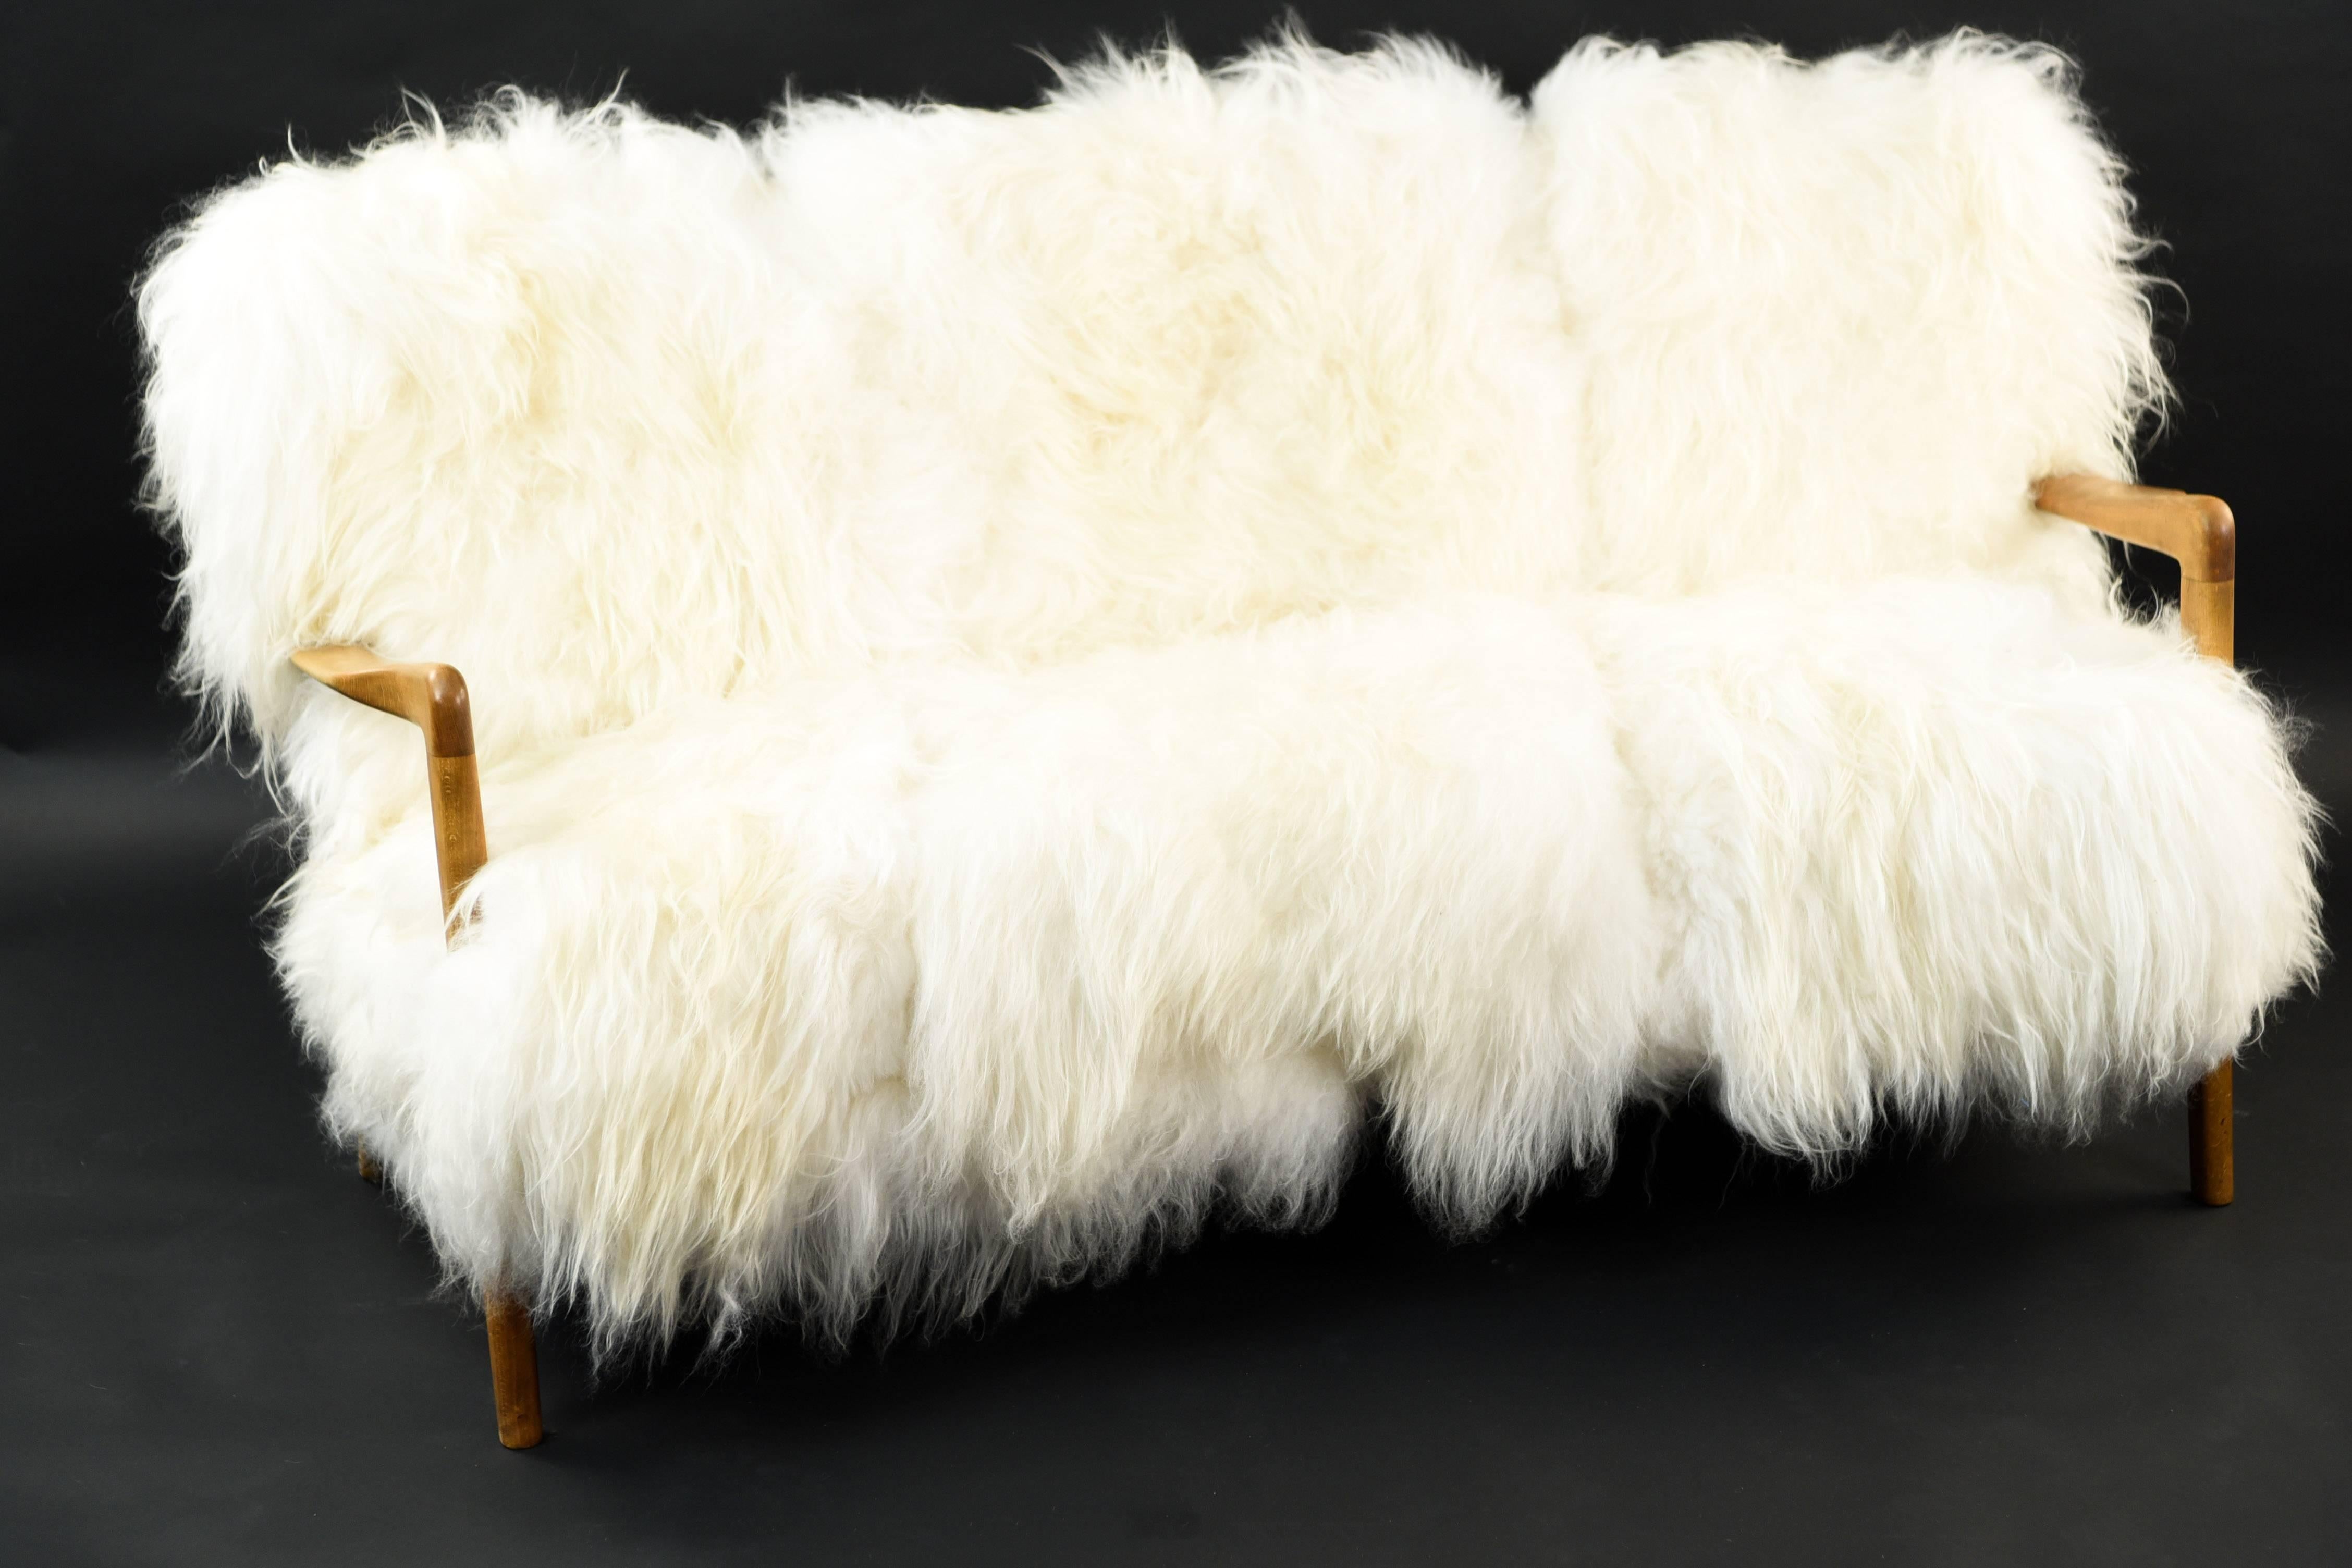 This sofa designed by Soren Hansen for Fritz Hansen is part of the 8000 series from the 1940s. It has been upholstered in luxurious, fluffy Mongolian lamb's fur, leaving just the recognizable armrests and legs exposed. An absolutely stunning piece